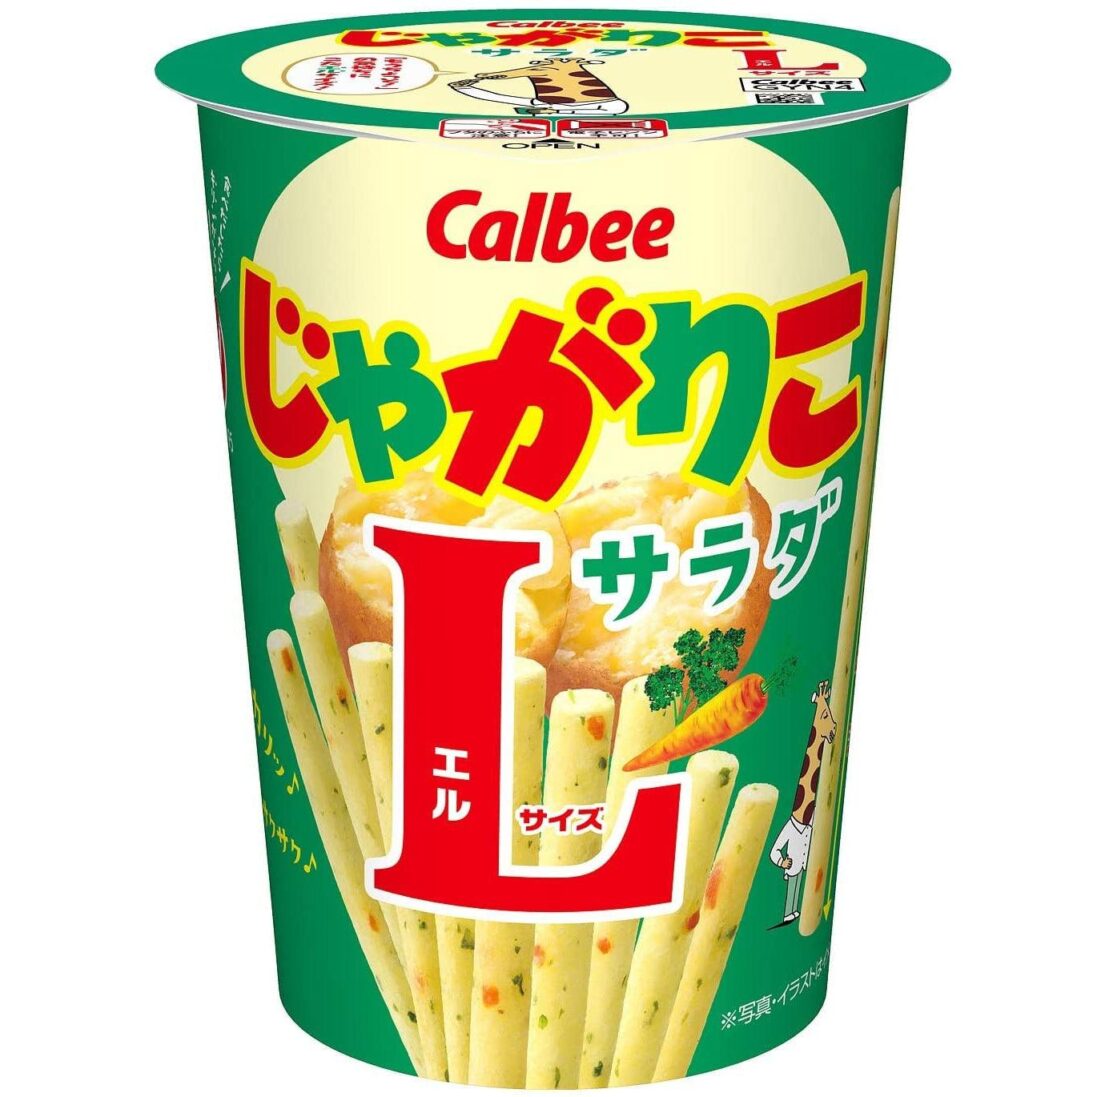 Calbee Jagarico Potato Sticks Snack Salad Flavor Large (Pack of 3 Cups)